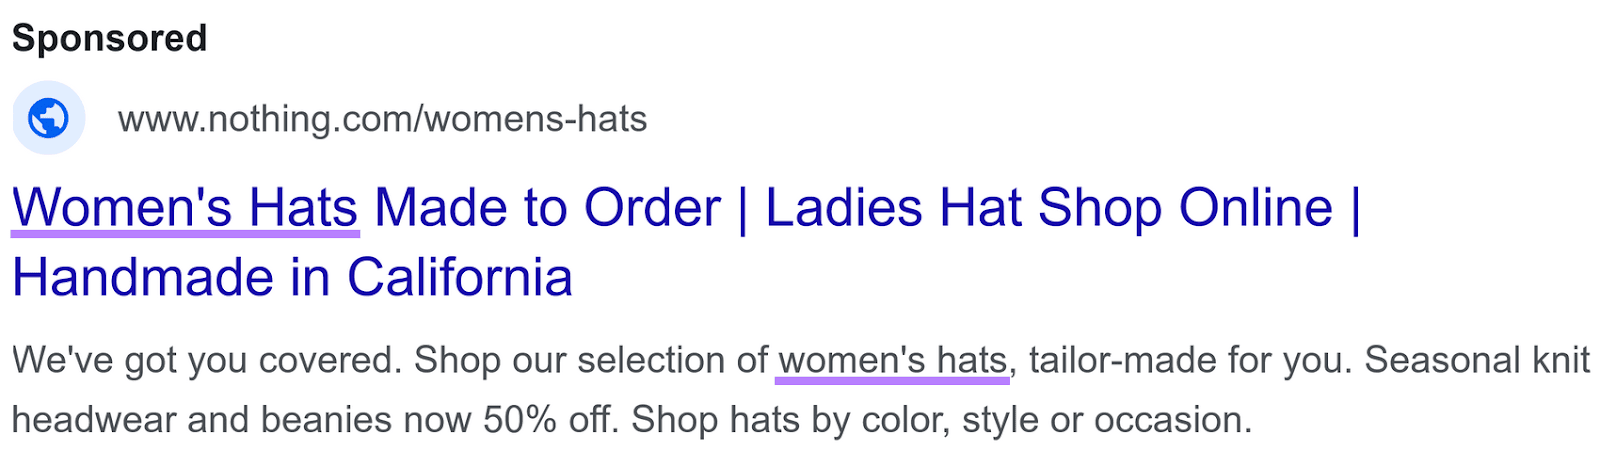 an ad copy for "women's hards" generated by AI Ad Copy Generator